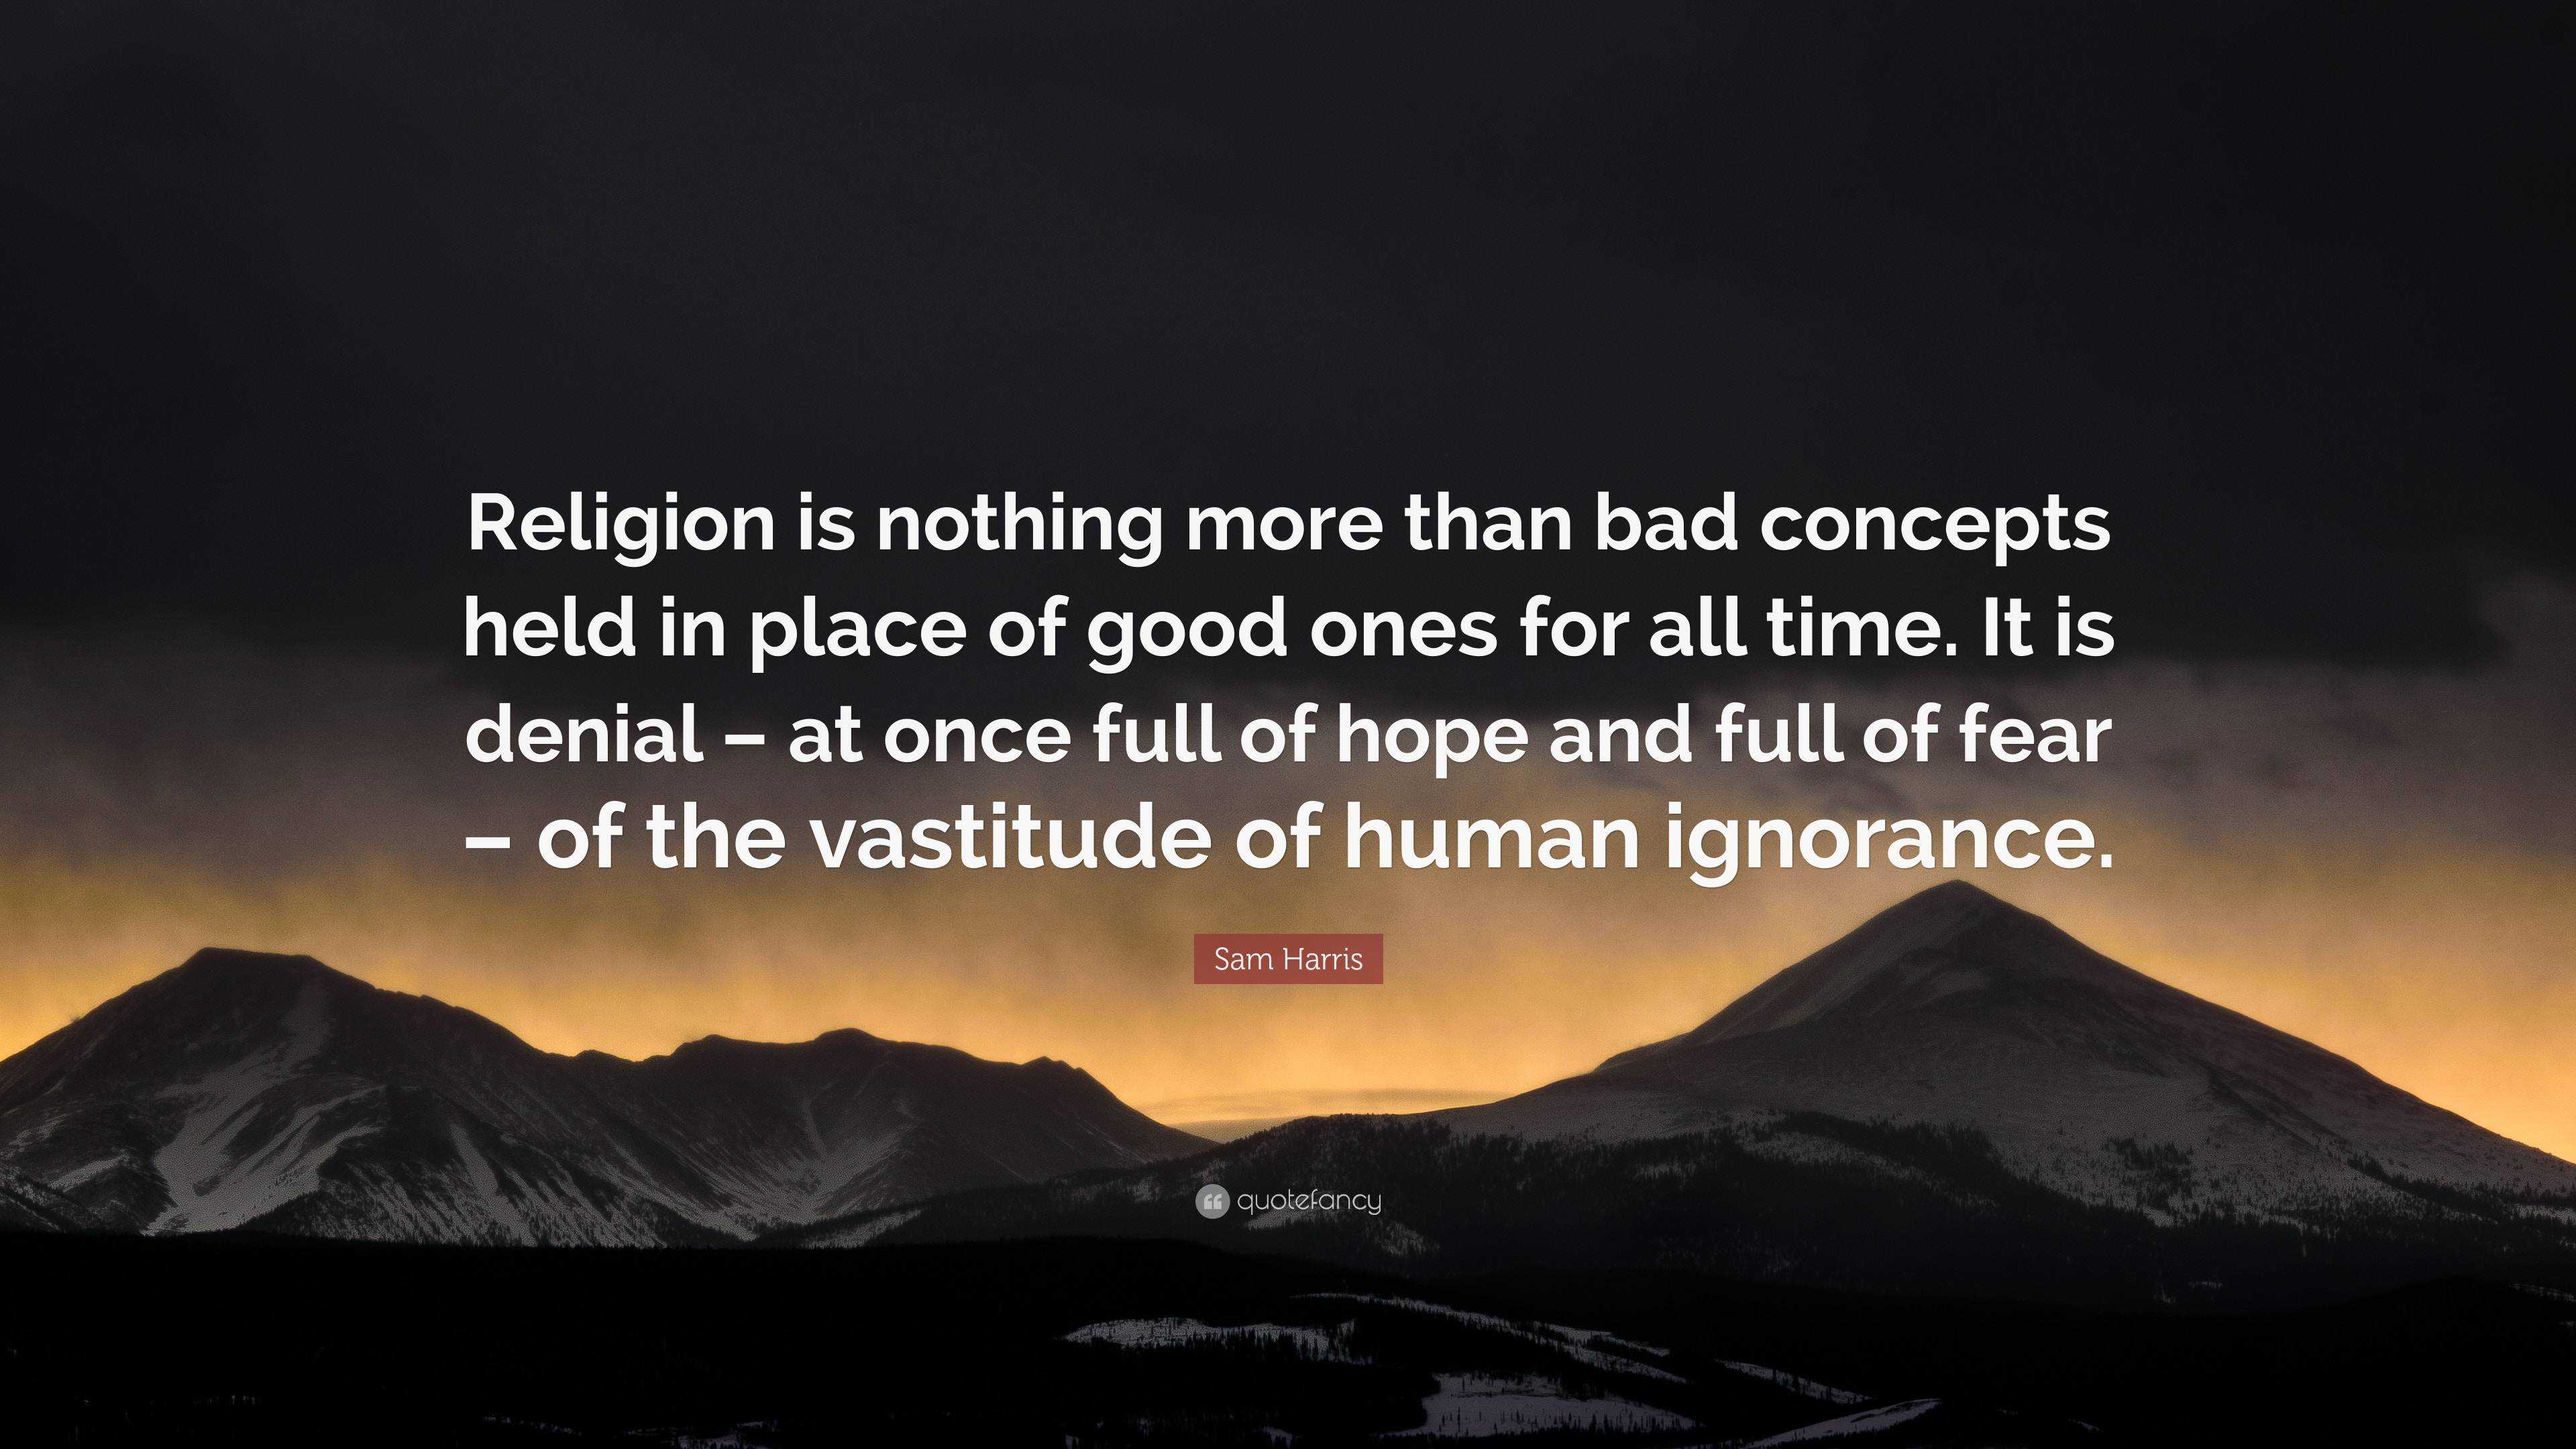 Sam Harris Quote: “Religion Is Nothing More Than Bad Concepts Held In